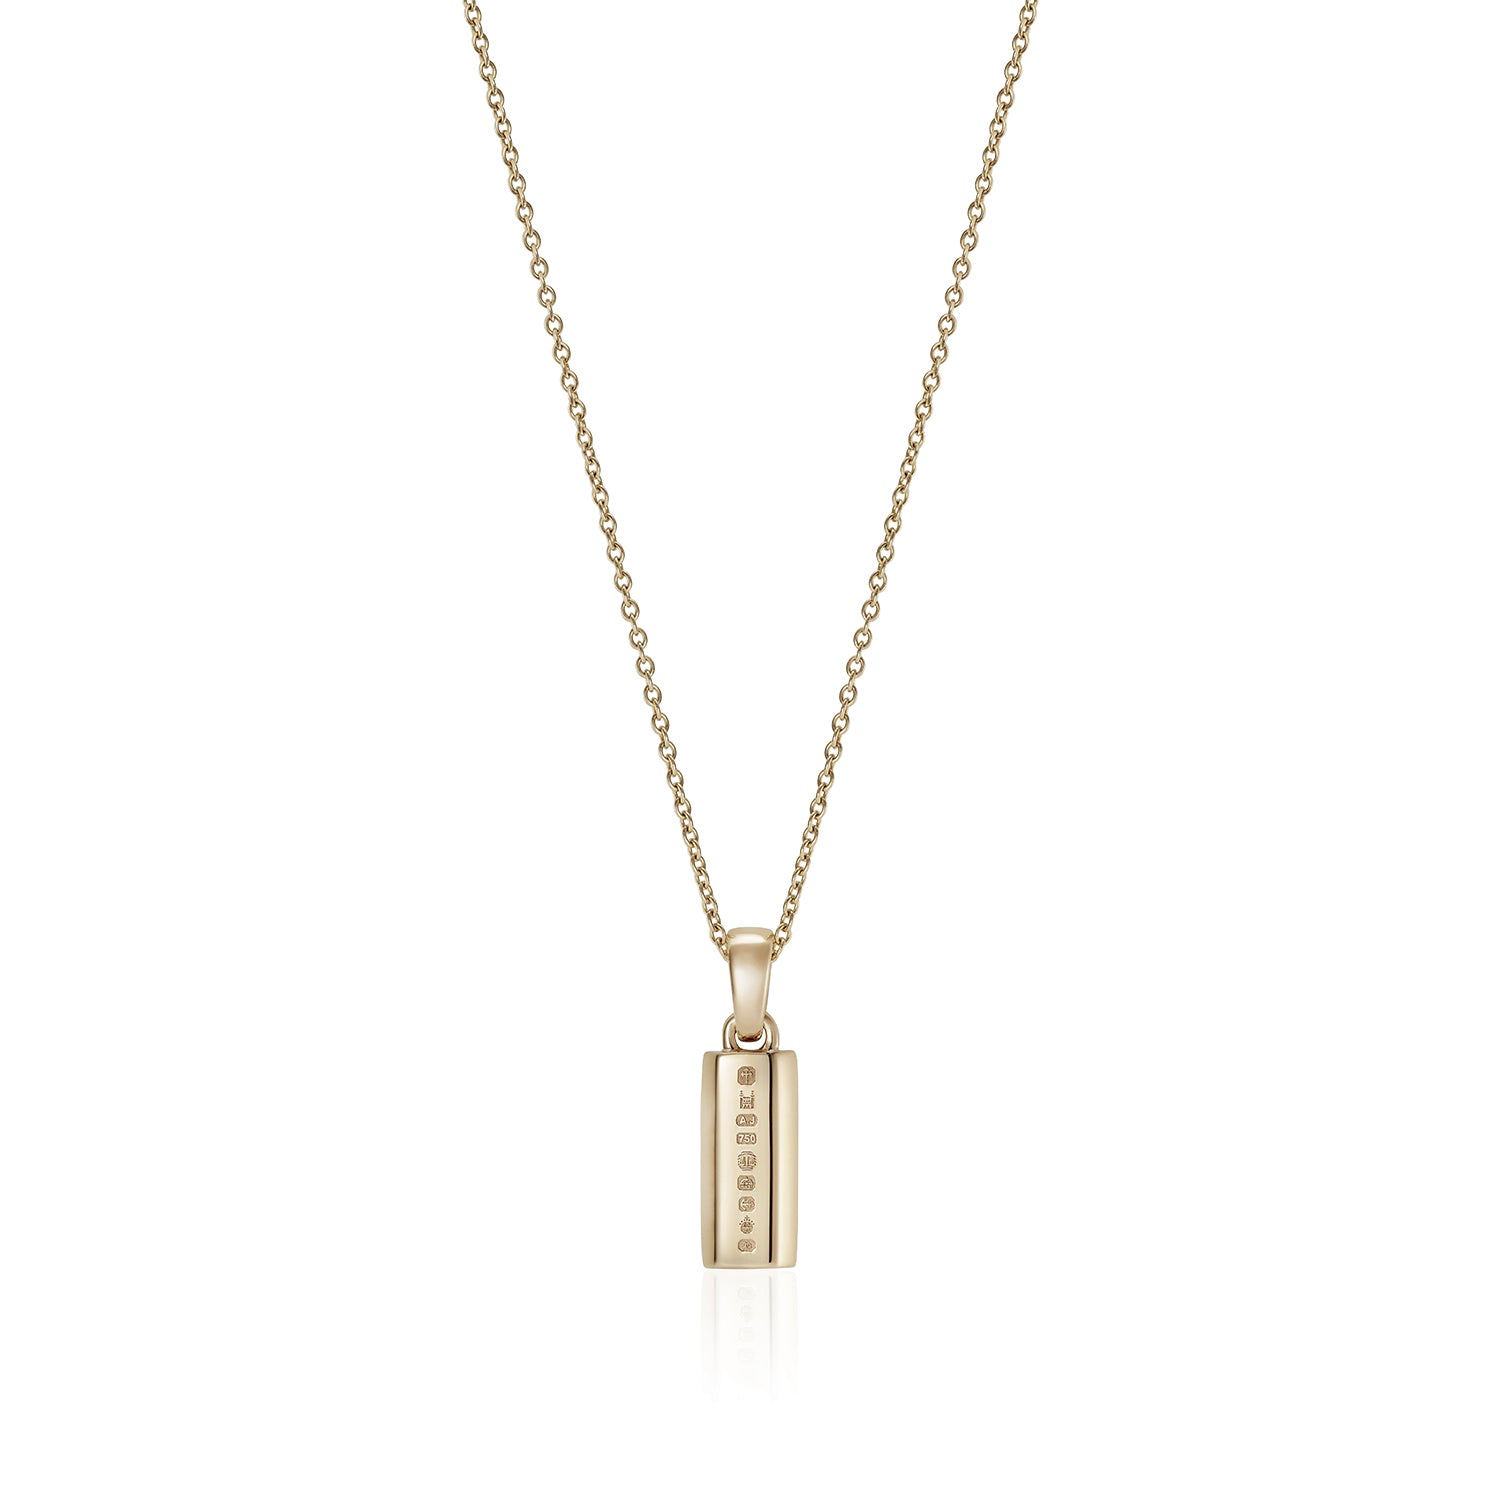 886 Royal Mint Necklaces 886 Small Bar Pendant with Chain in 9ct Yellow Gold